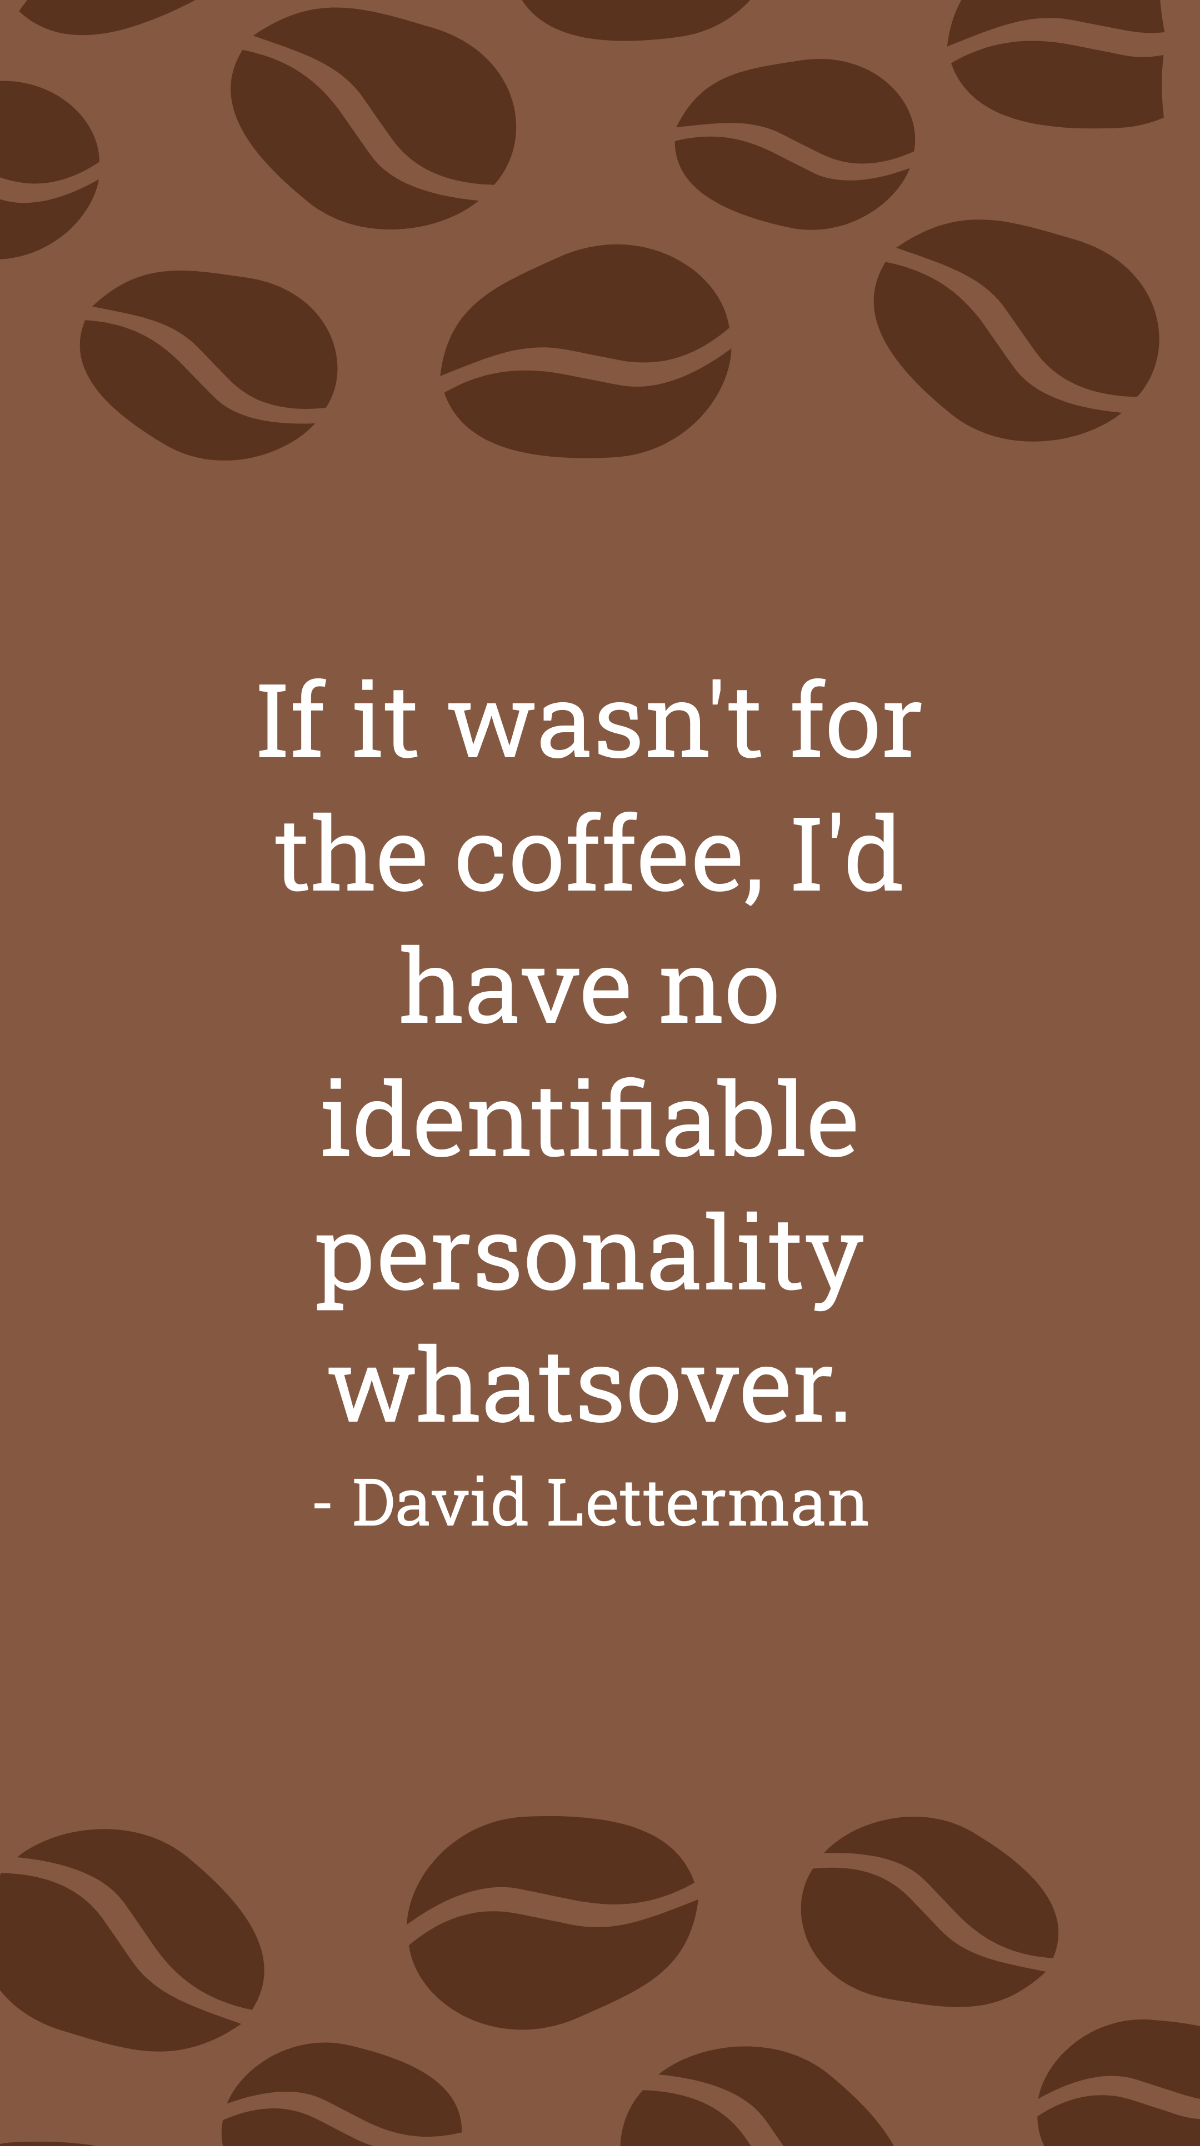 David Letterman - If it wasn't for the coffee, I'd have no identifiable personality whatsover. Template